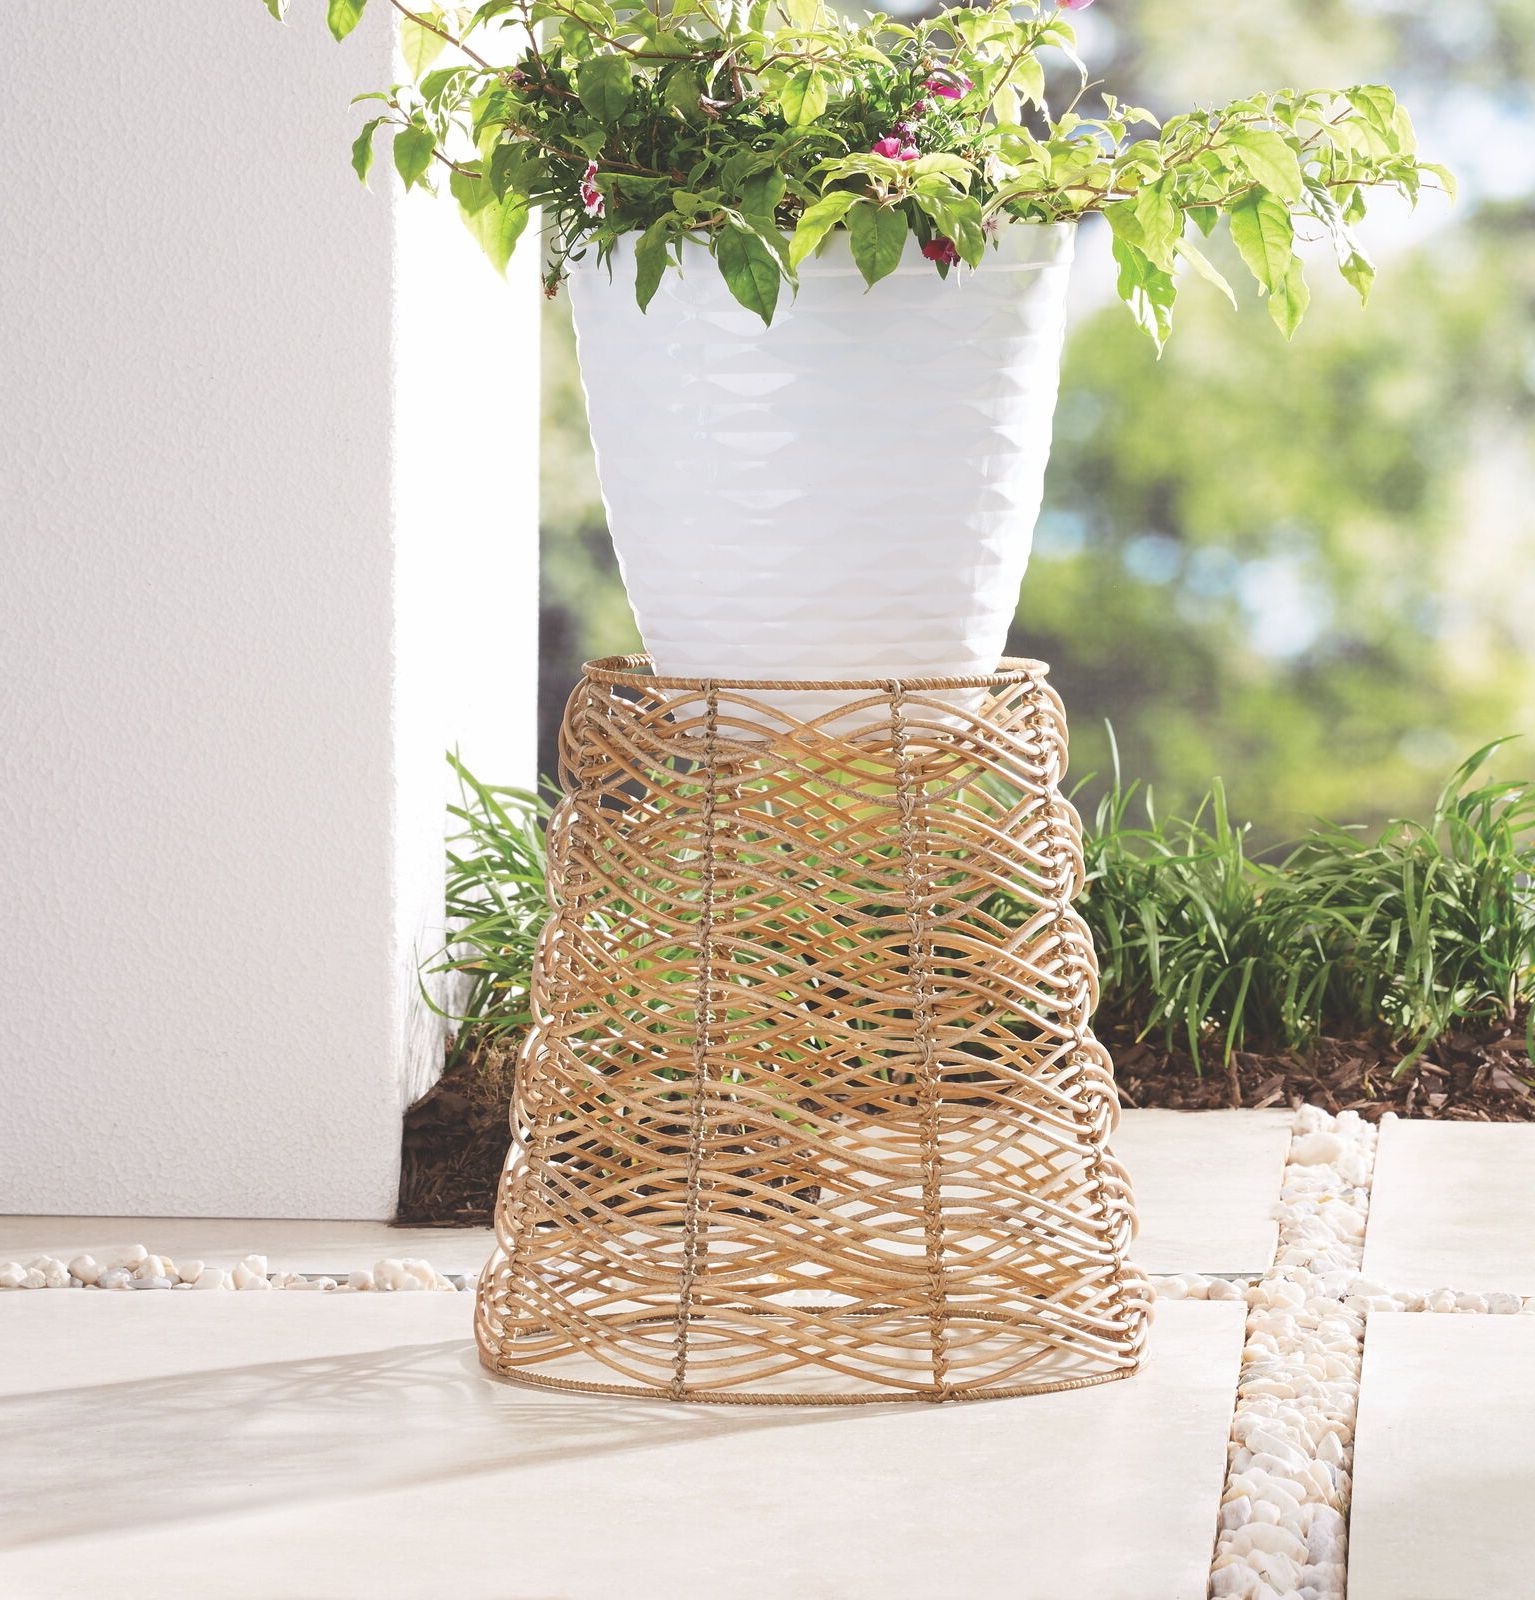 Resin Plant Stands In Current Ventura Resin Rattan Woven Plant Stand With Metal Frame Indoor Outdoor  Decor New (View 9 of 15)